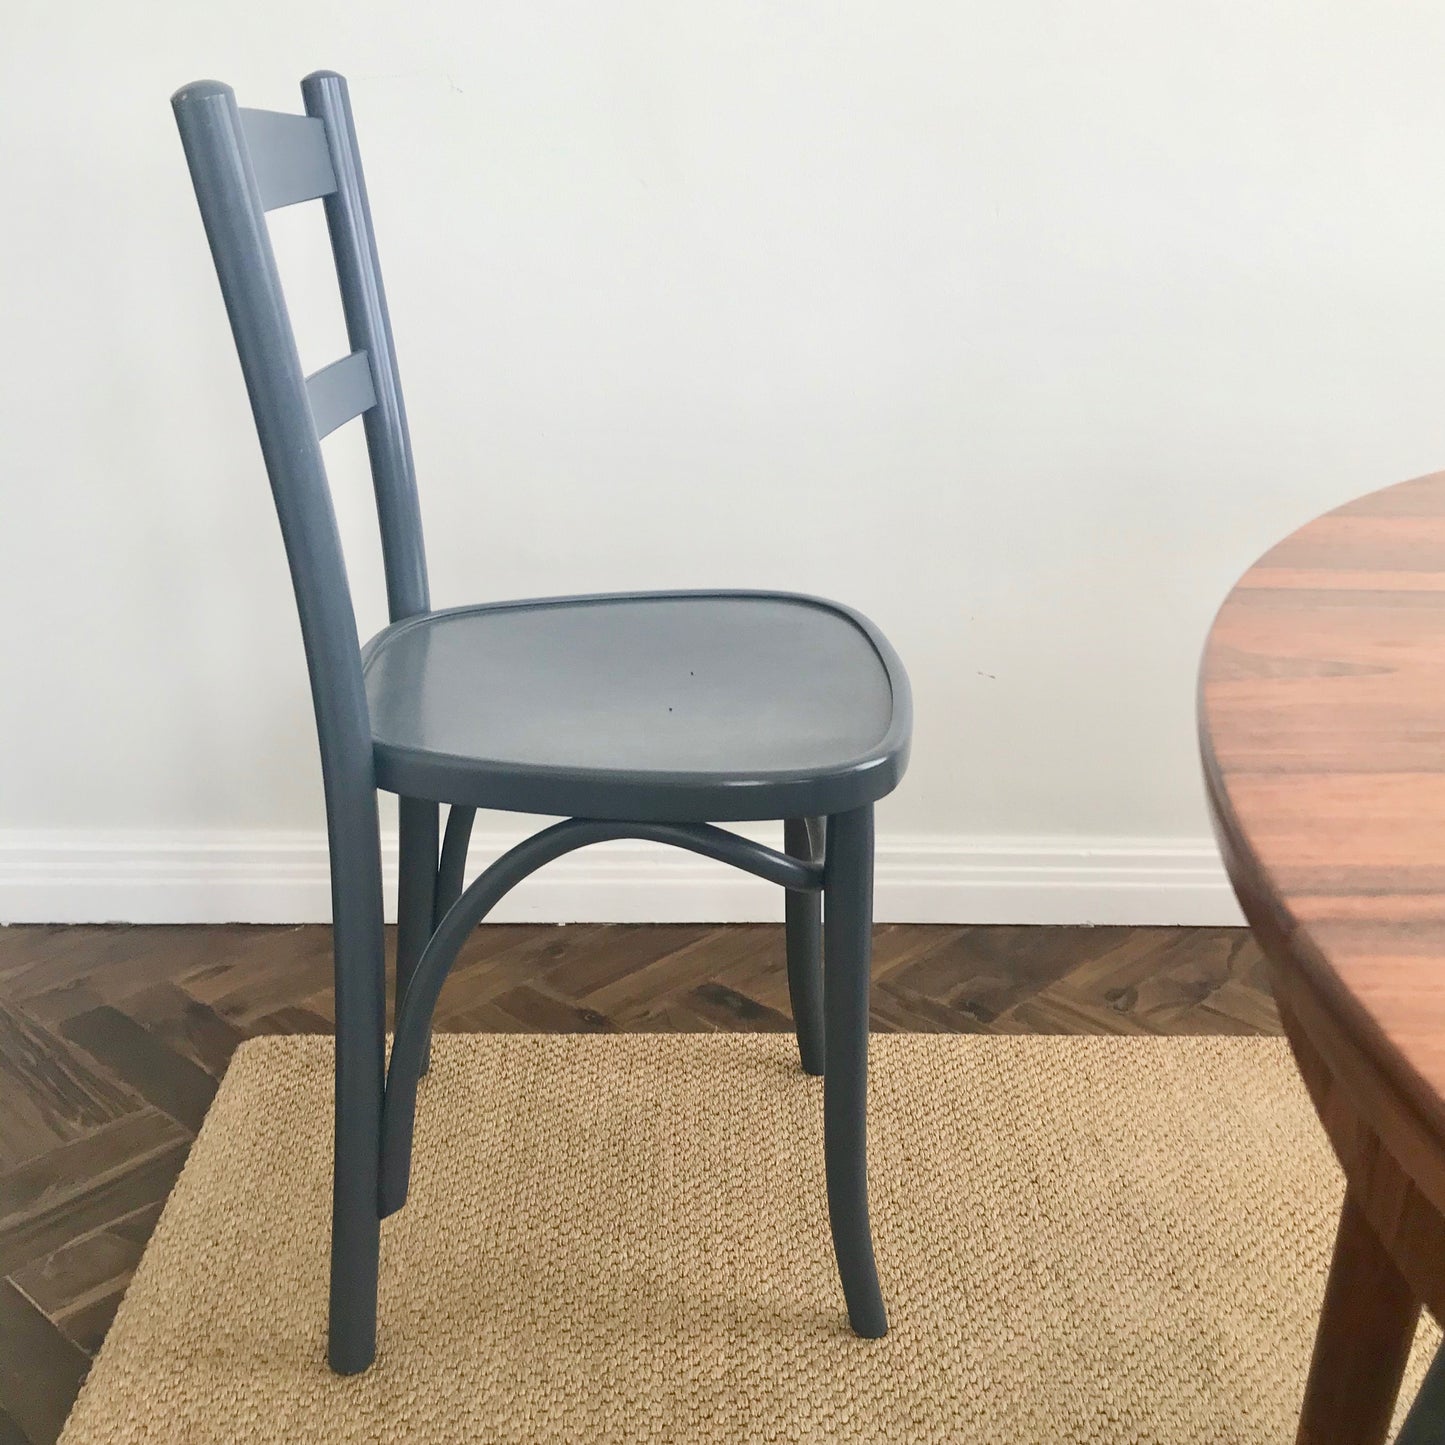 Load image into Gallery viewer, Set of FOUR No. 100 La Verna Chairs by Thonet
